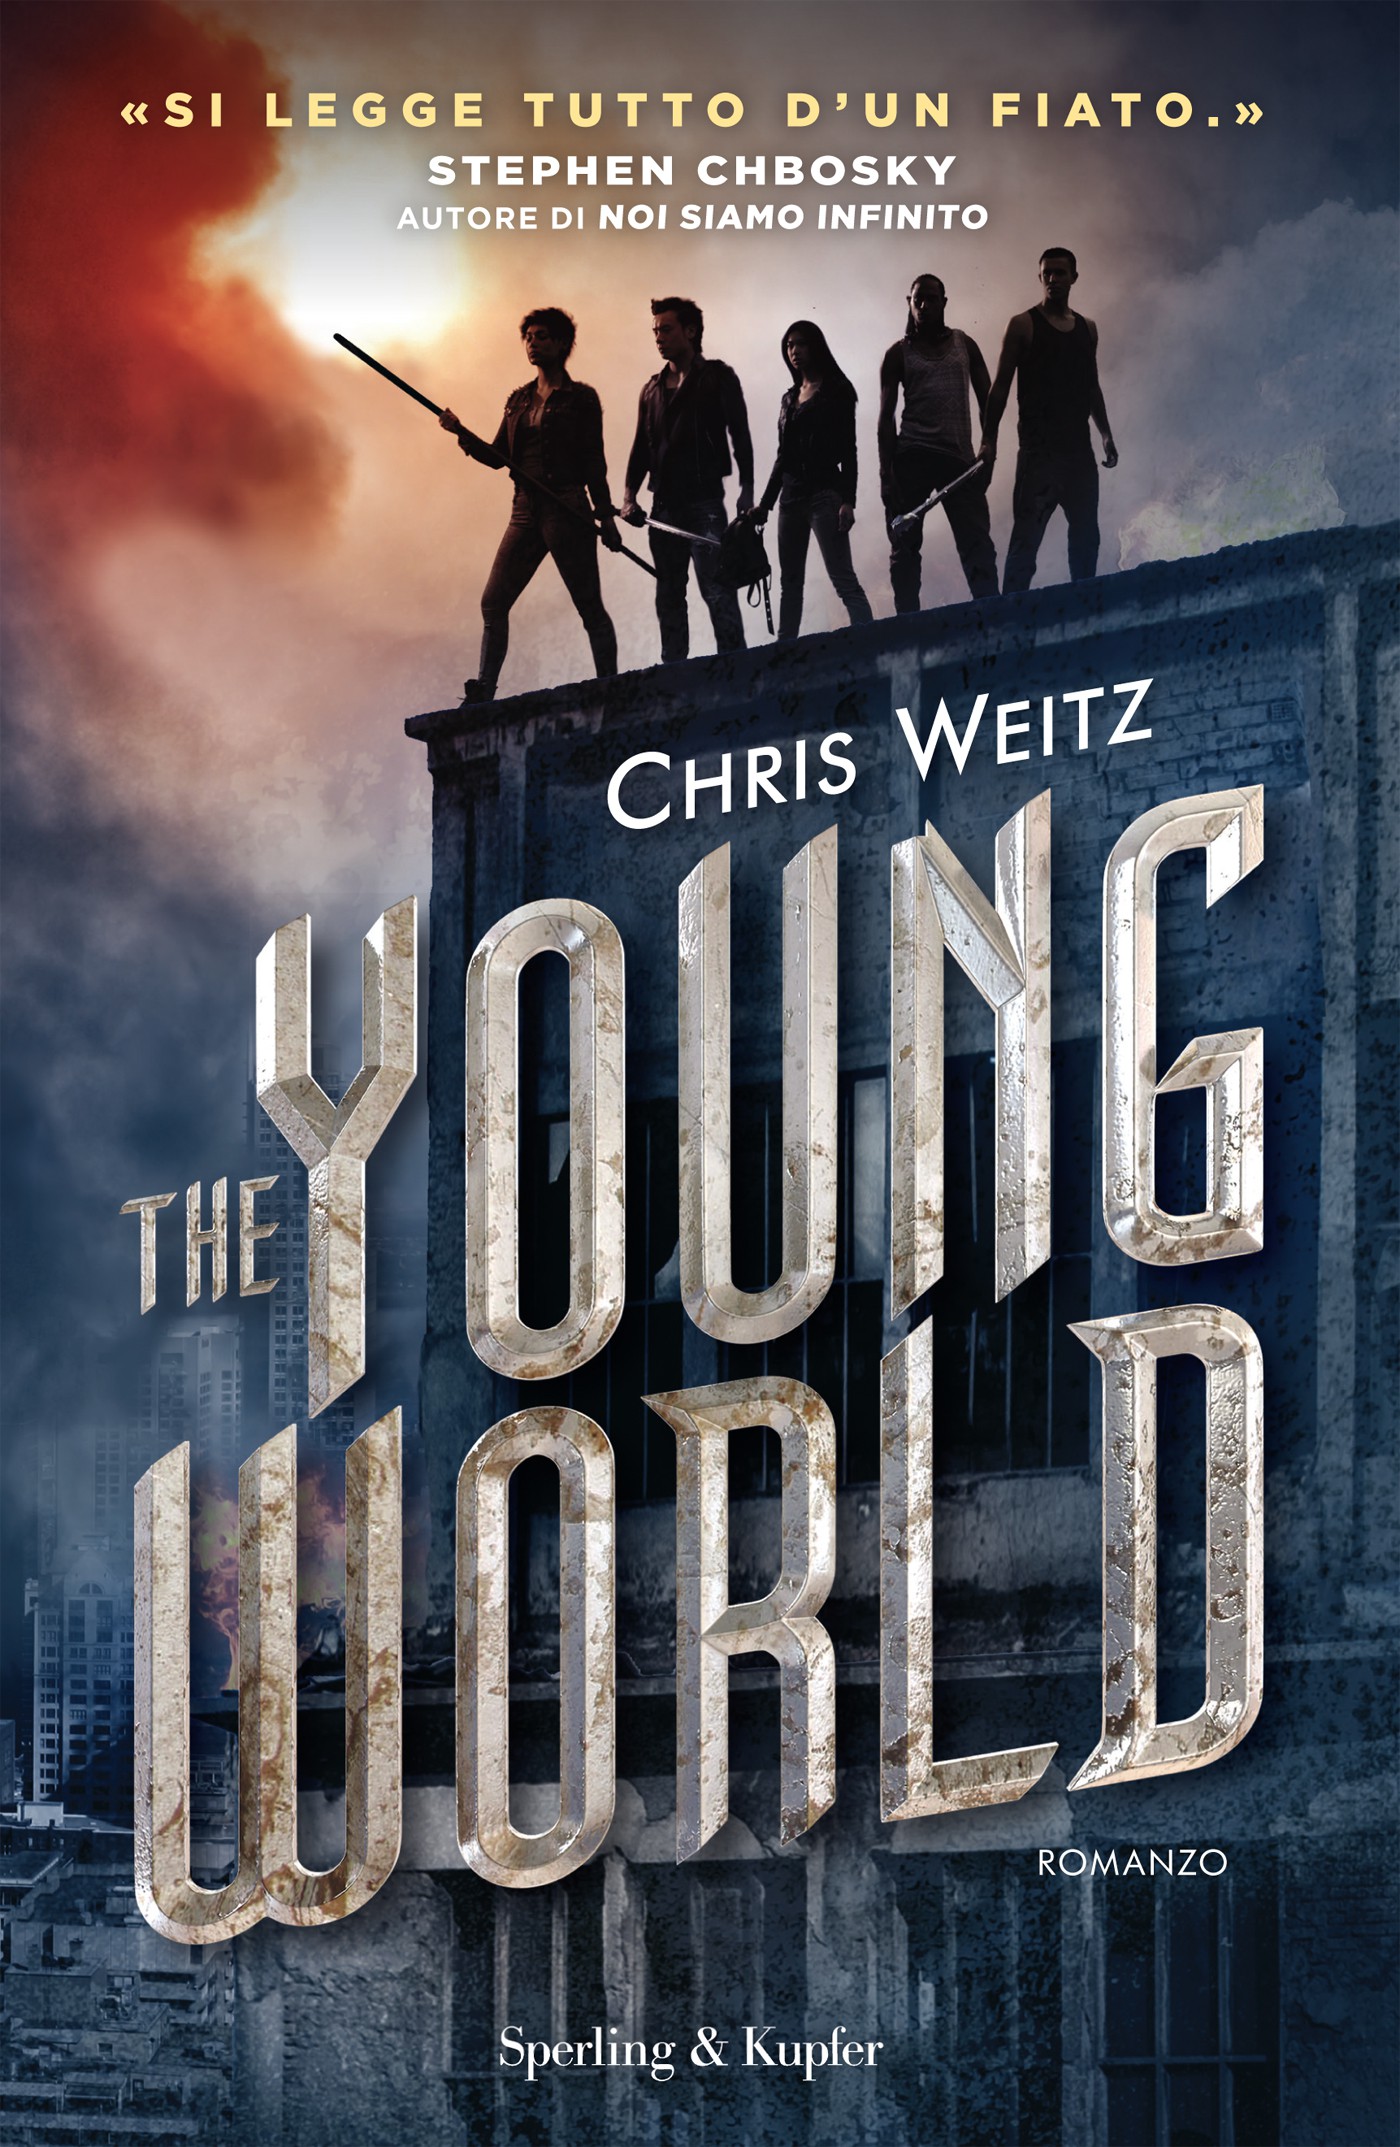 The young world - Bookrepublic